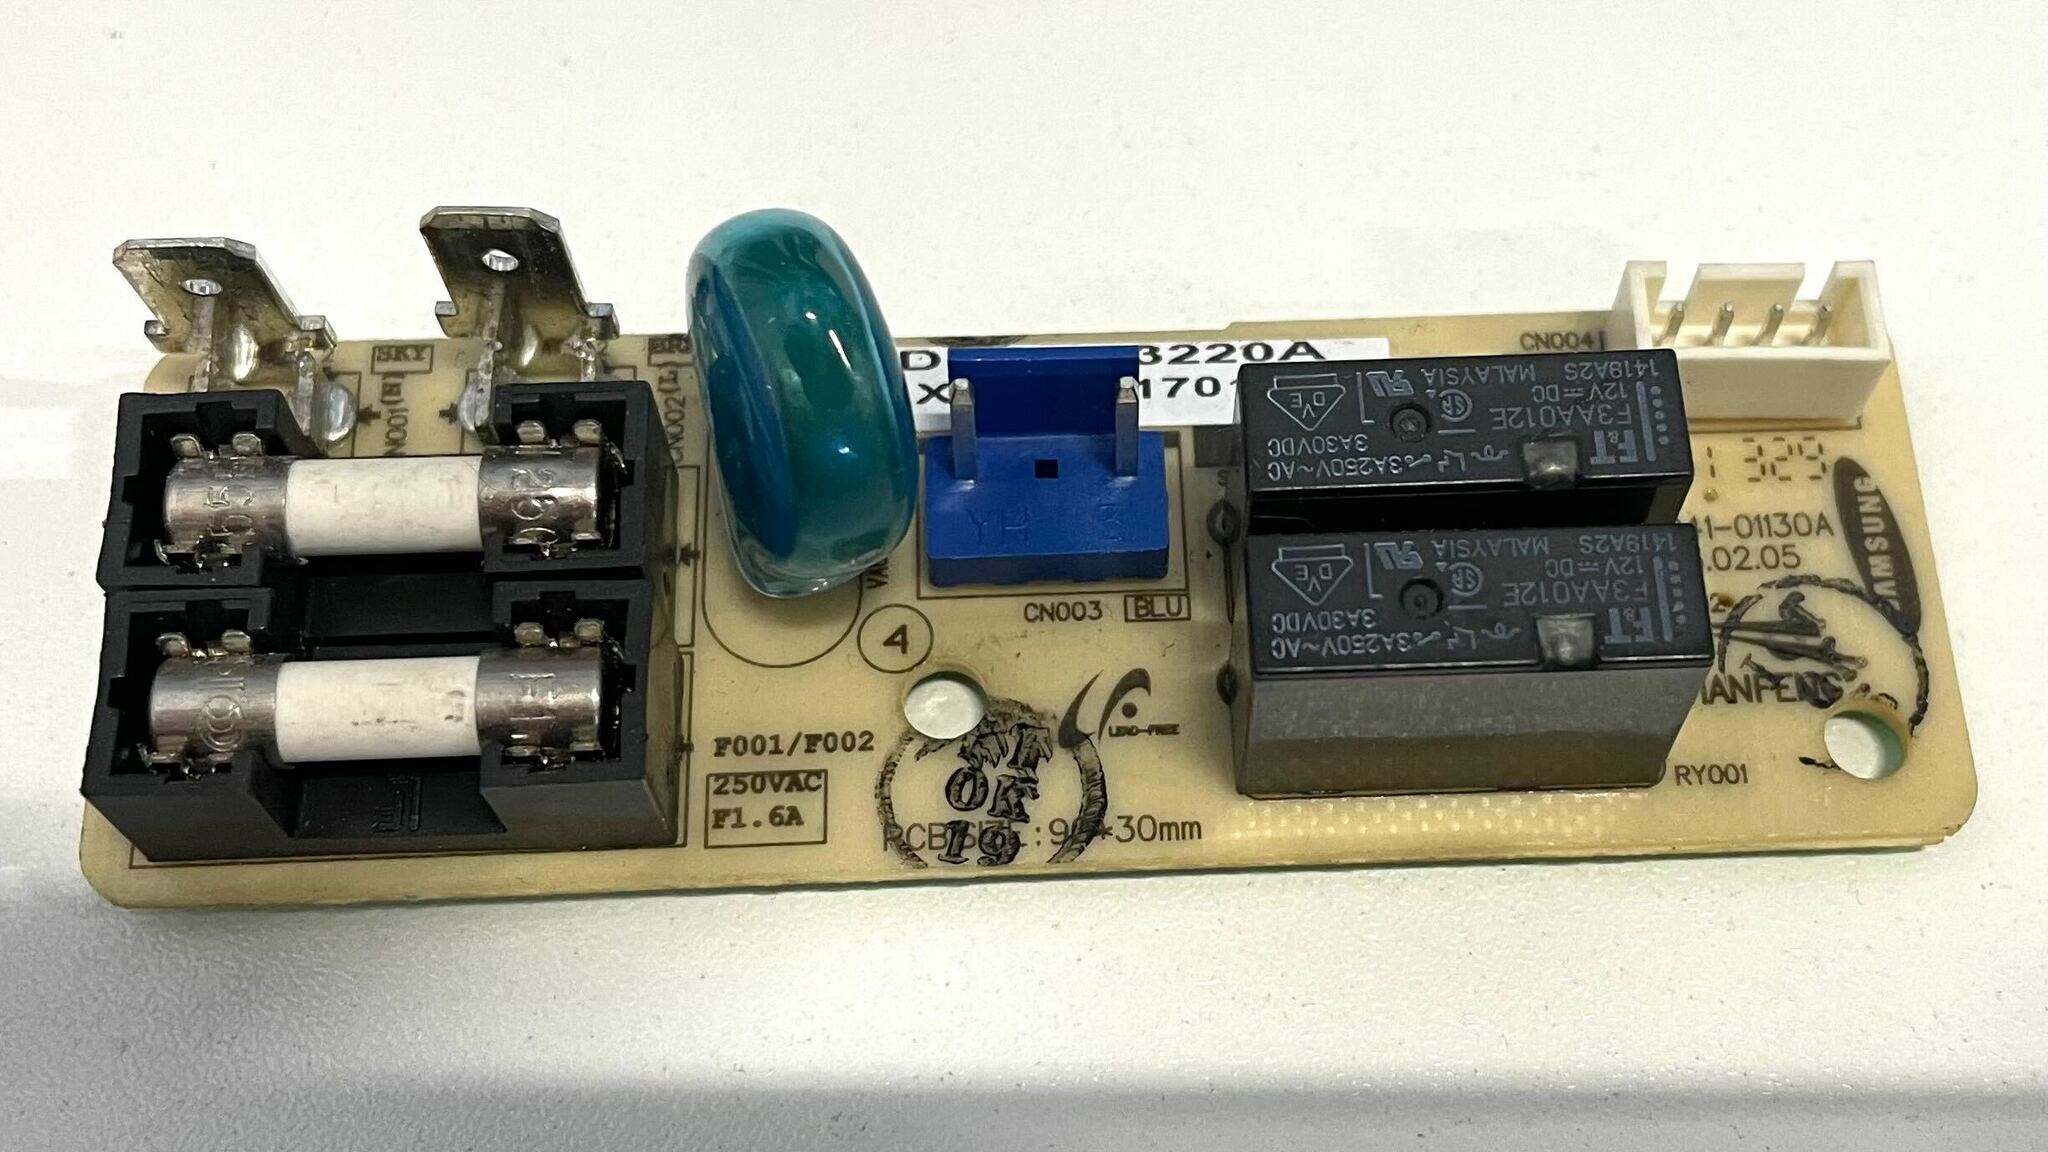 PCB Assembly Sub-Heater for samsung (DB93-13220A)